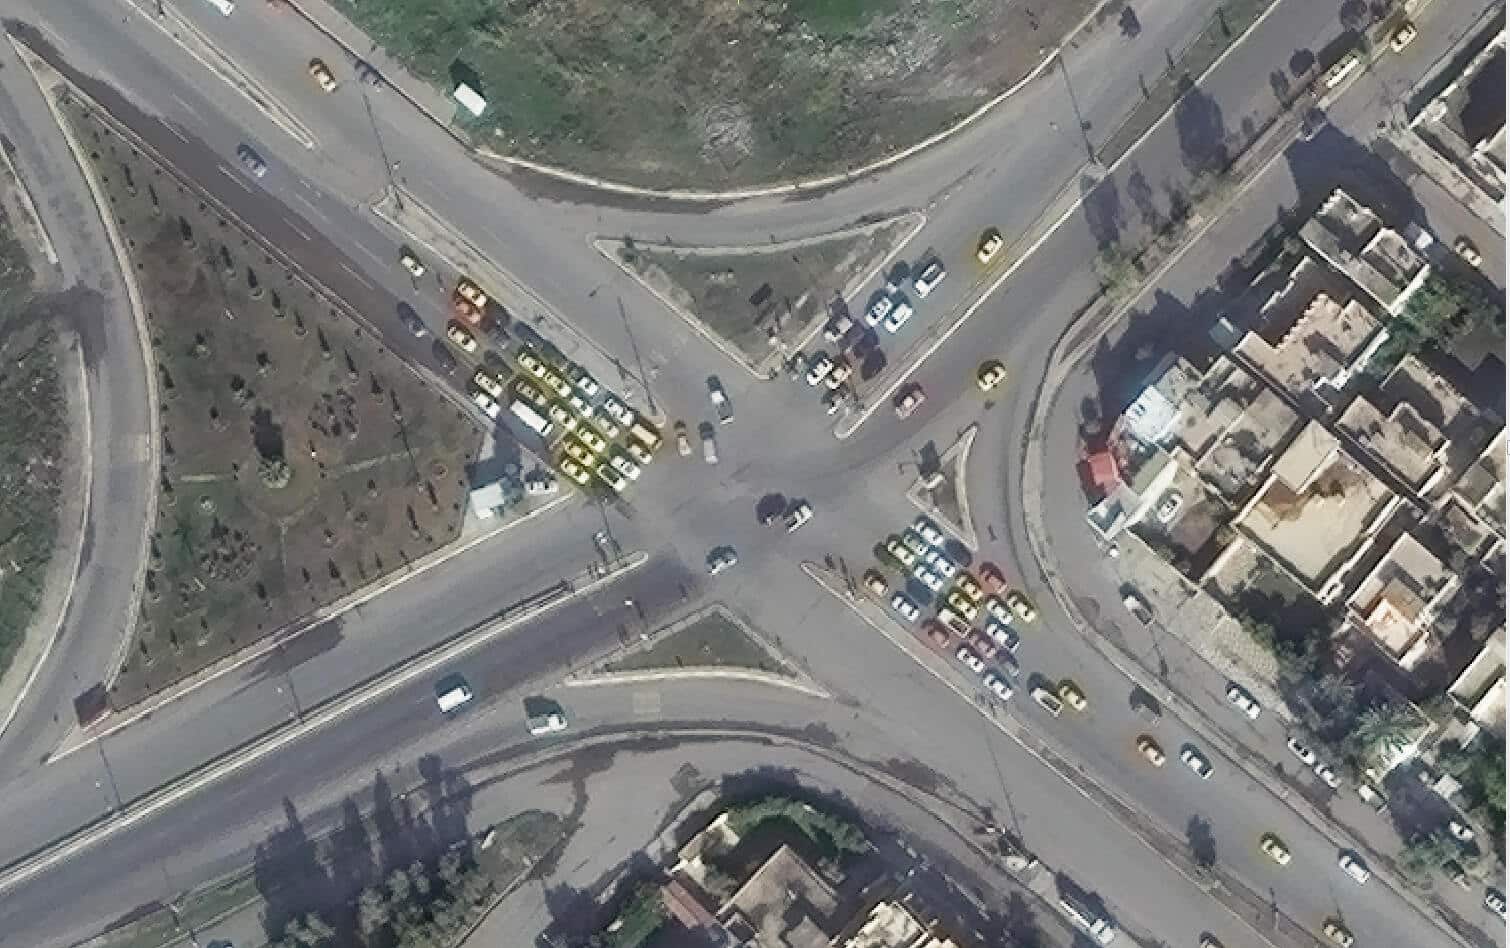 High Resolution Imagery example